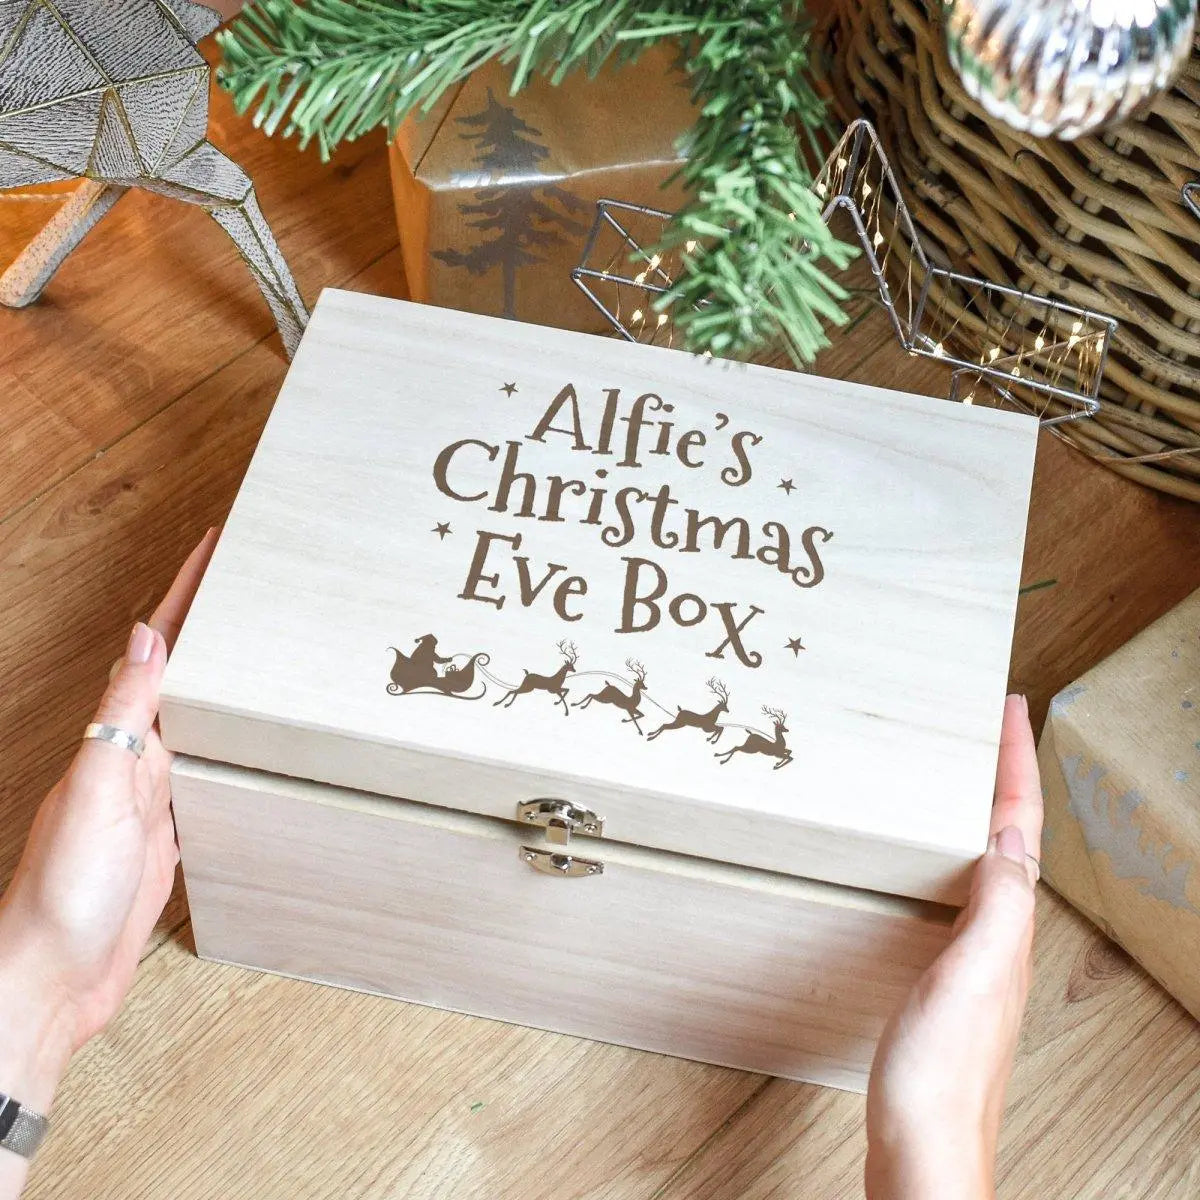 Personalised Kids Christmas Eve Box, Engraved Christmas Eve Box, Kids Christmas Eve Box, Child Xmas Box, Wooden Crate, Xmas Box, Gift - Amy Lucy